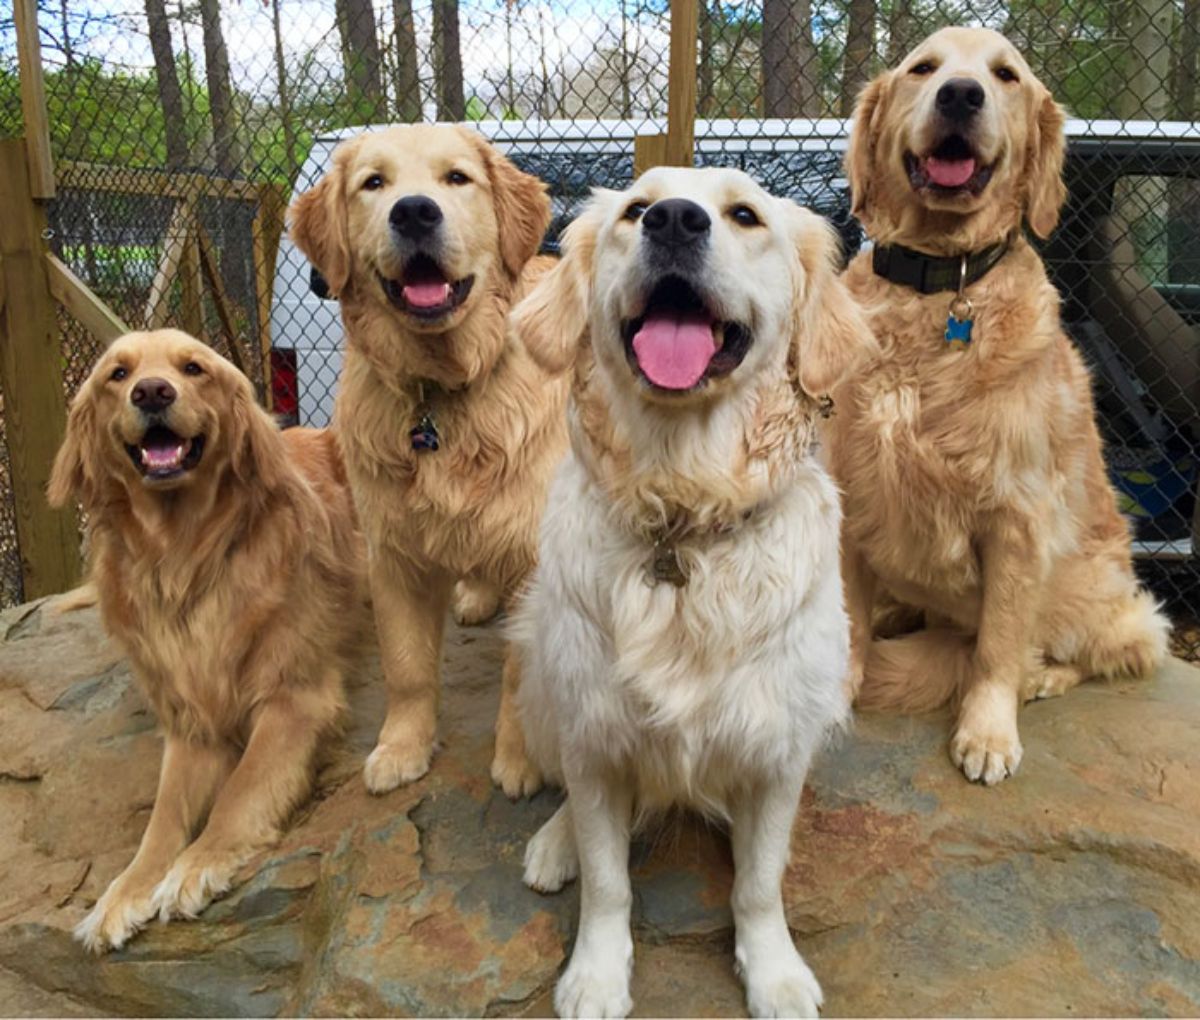 four smiling golden retrievers sitting together